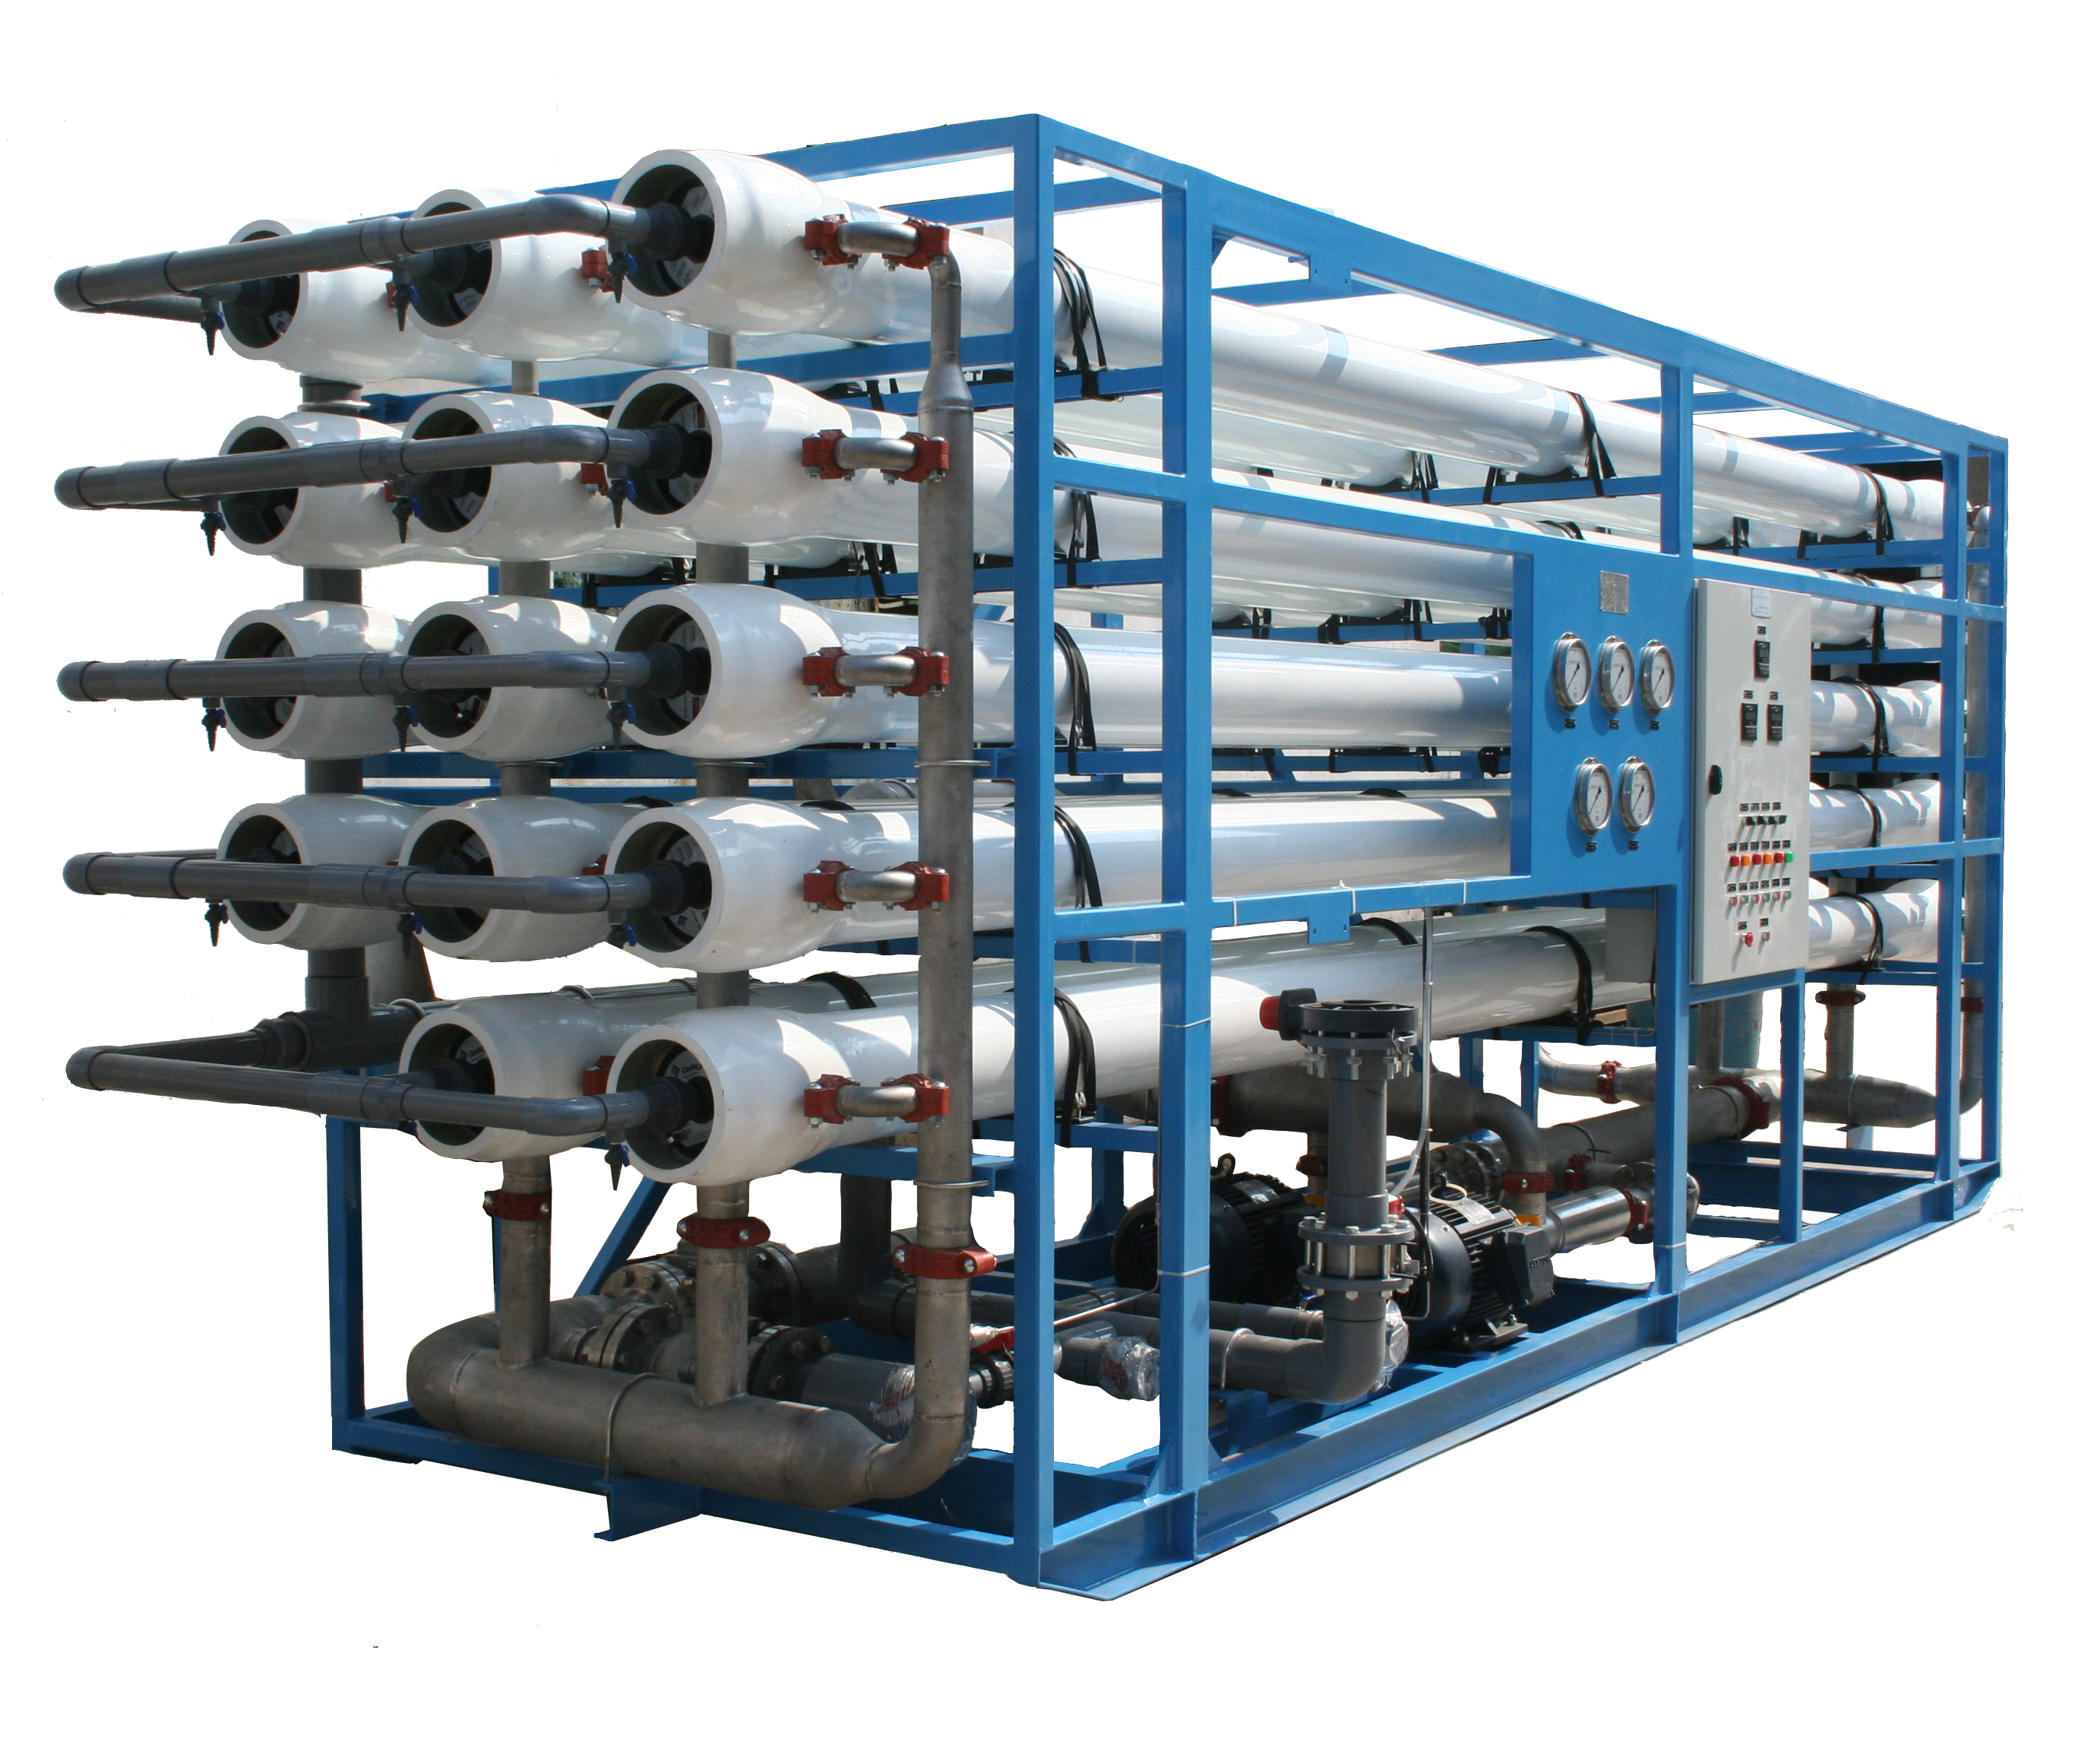 Introduction to the significance of seawater desalination